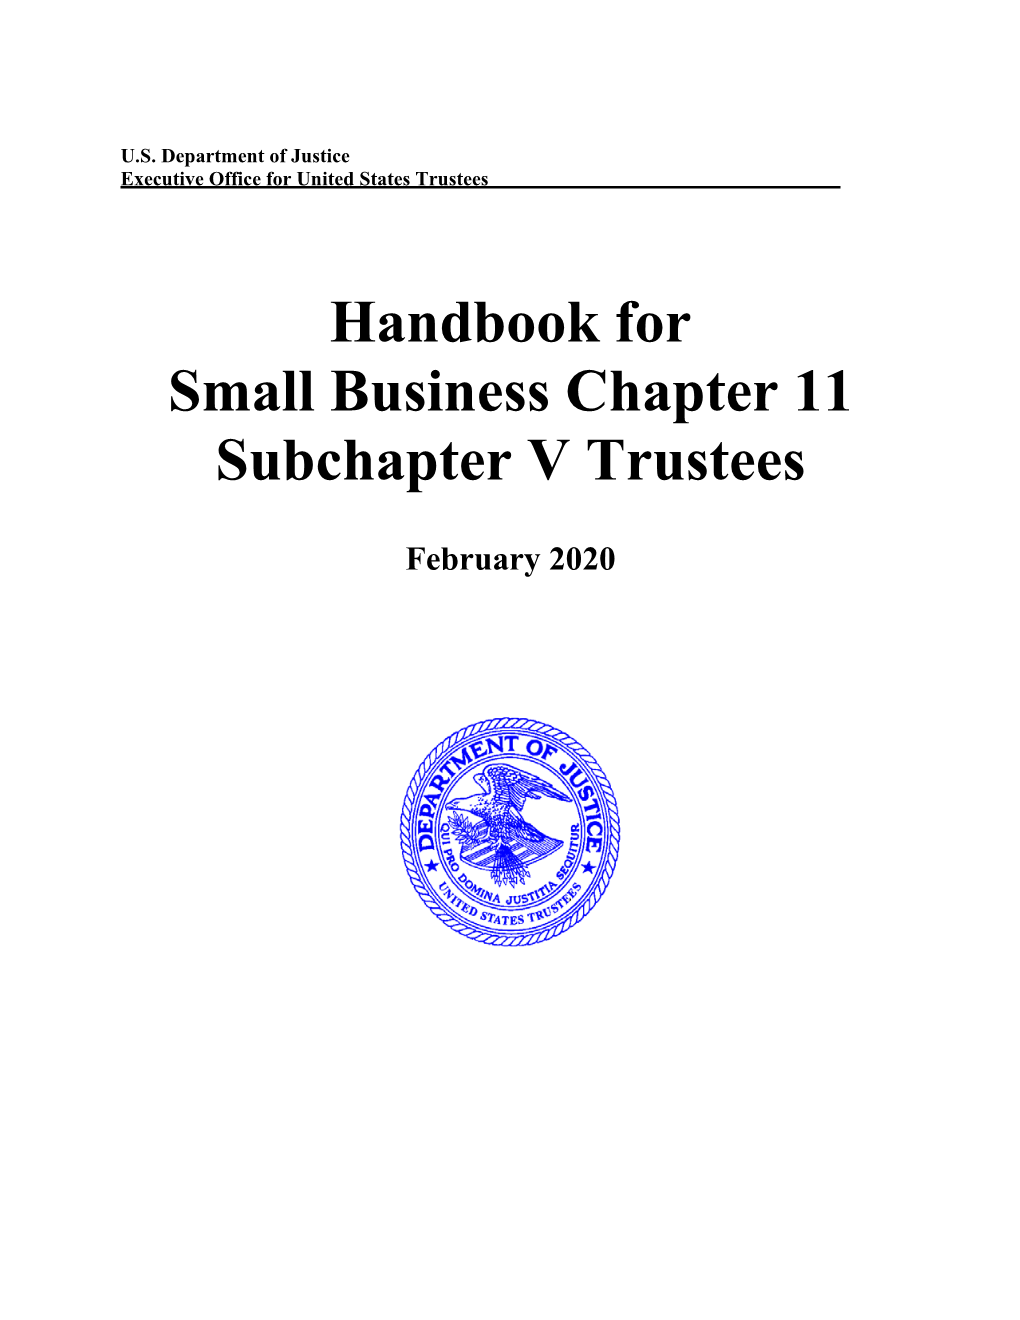 Handbook for Small Business Chapter 11 Subchapter V Trustees